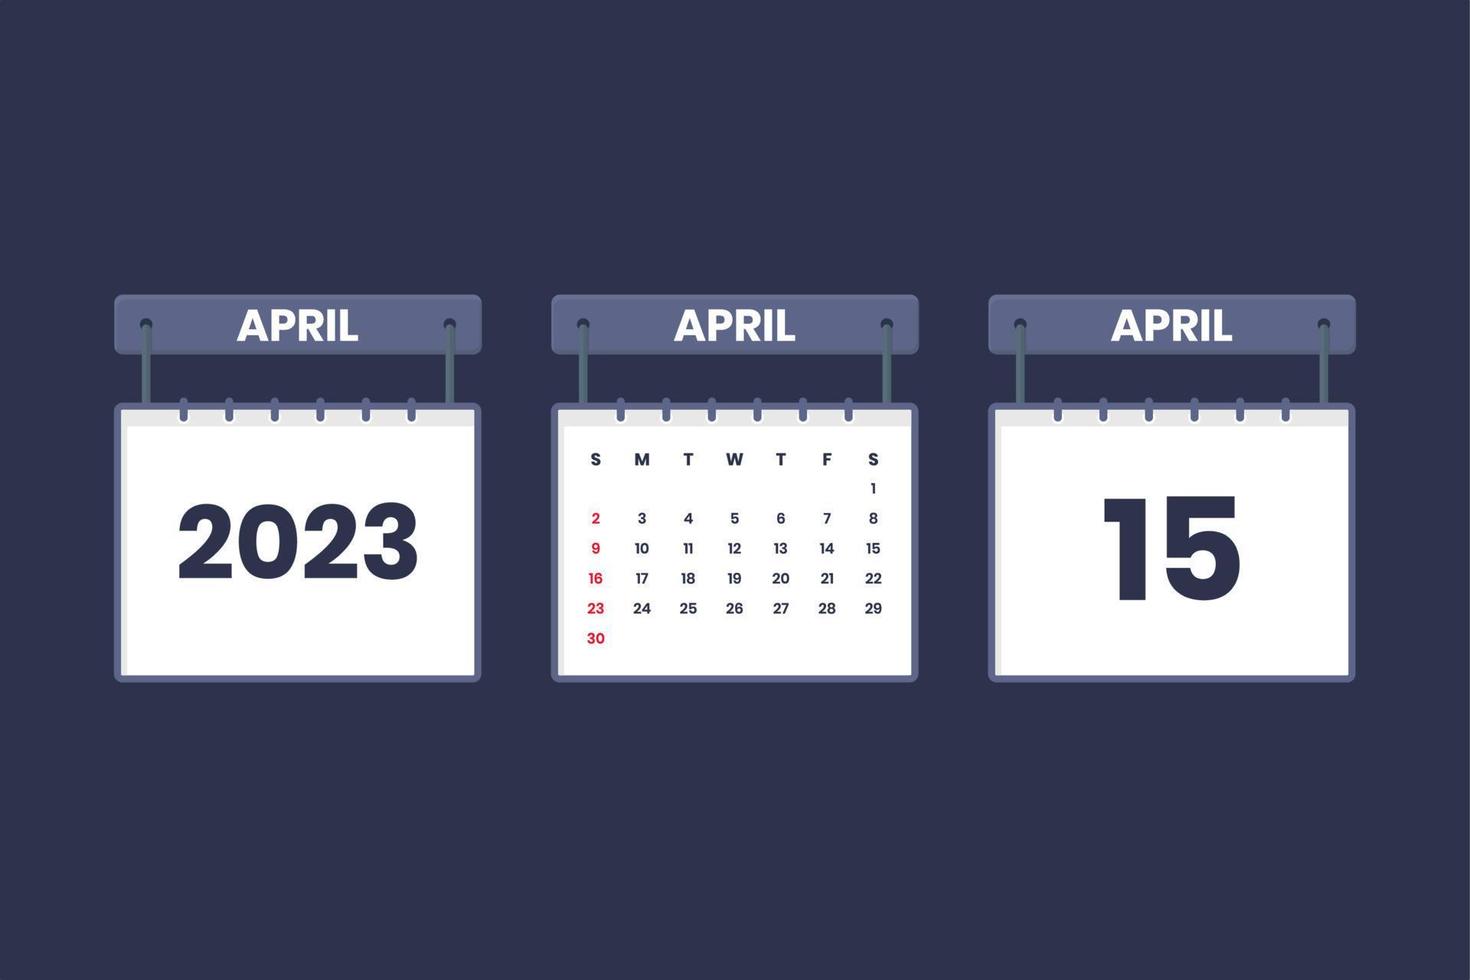 15 April 2023 calendar icon for schedule, appointment, important date concept vector